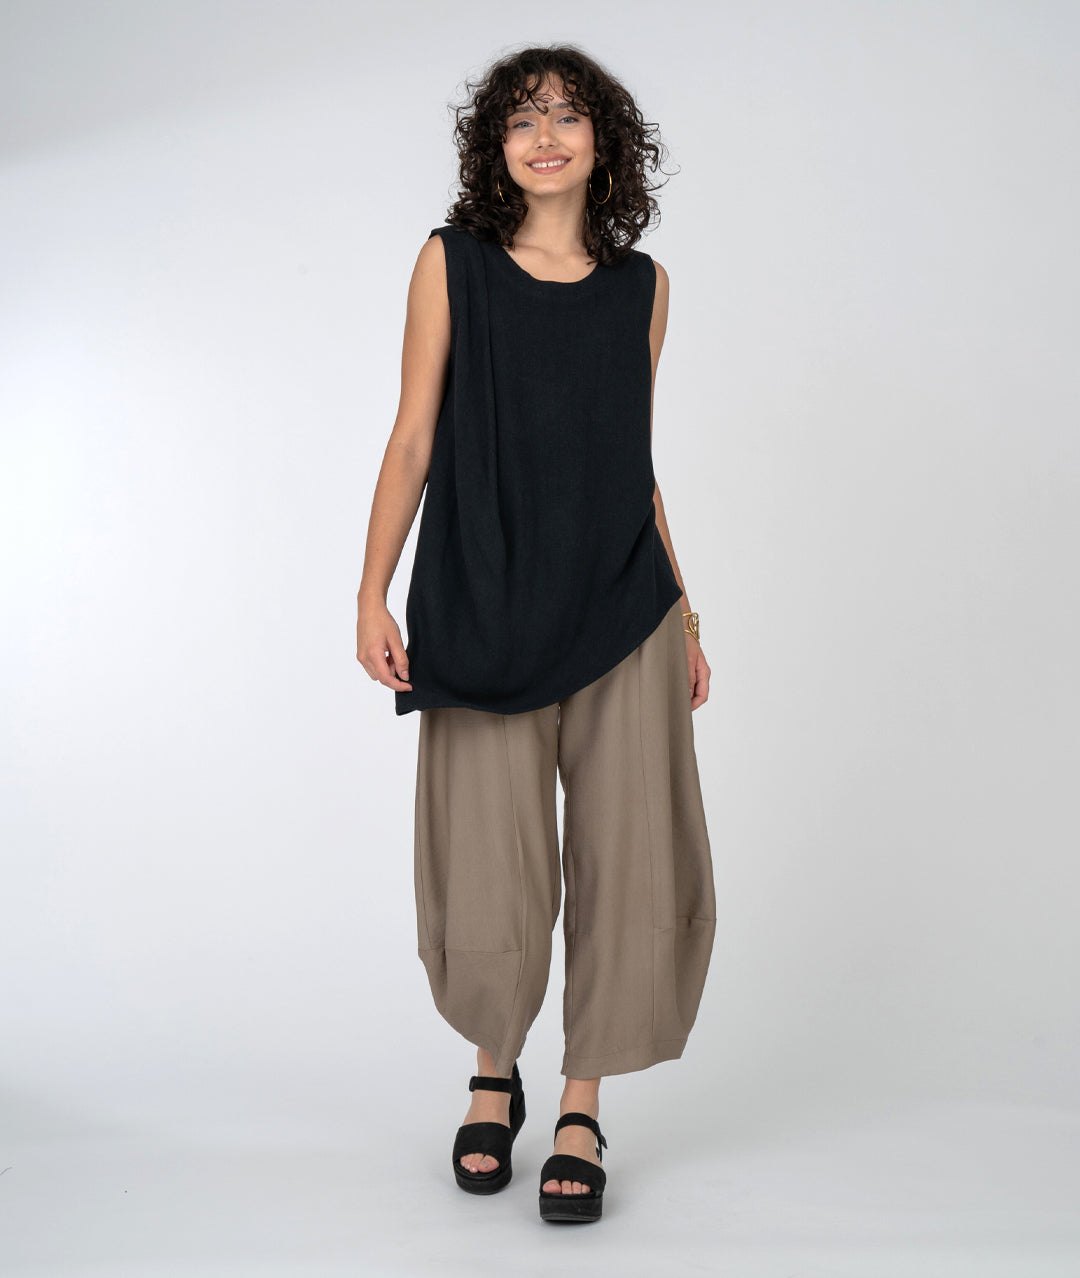 Sleeveless top with beautiful gather at one shoulder and asymmetrical hemline. Taupe pants and black platform sandals.